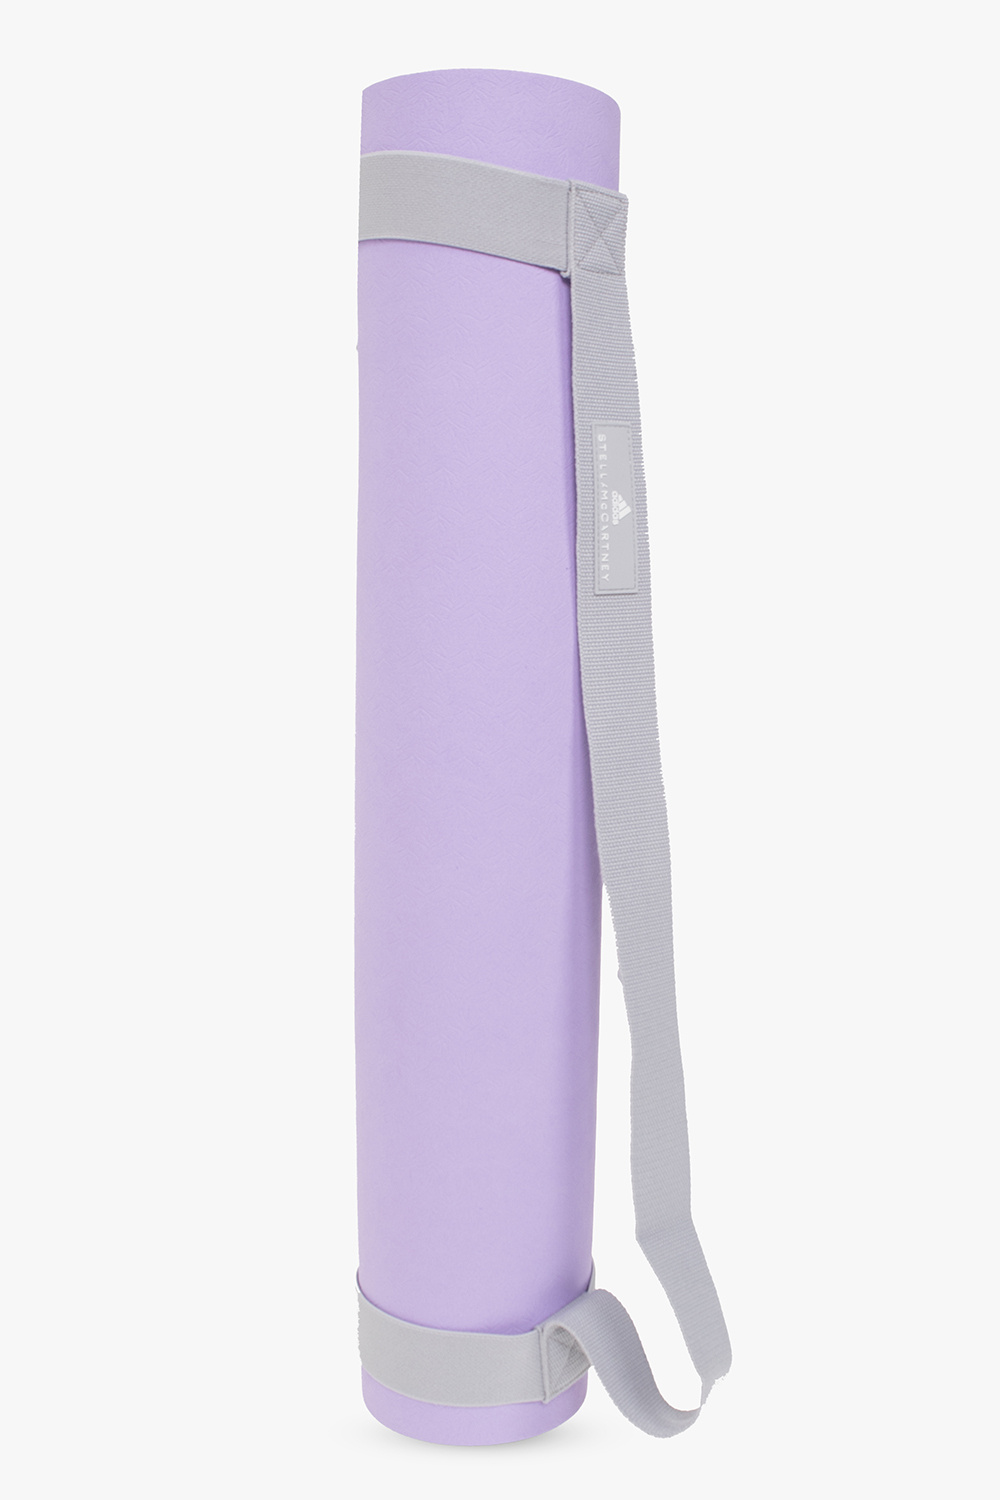 ADIDAS BY STELLA MCCARTNEY YOGA MAT HG8644 – BCODE Your, 60% OFF